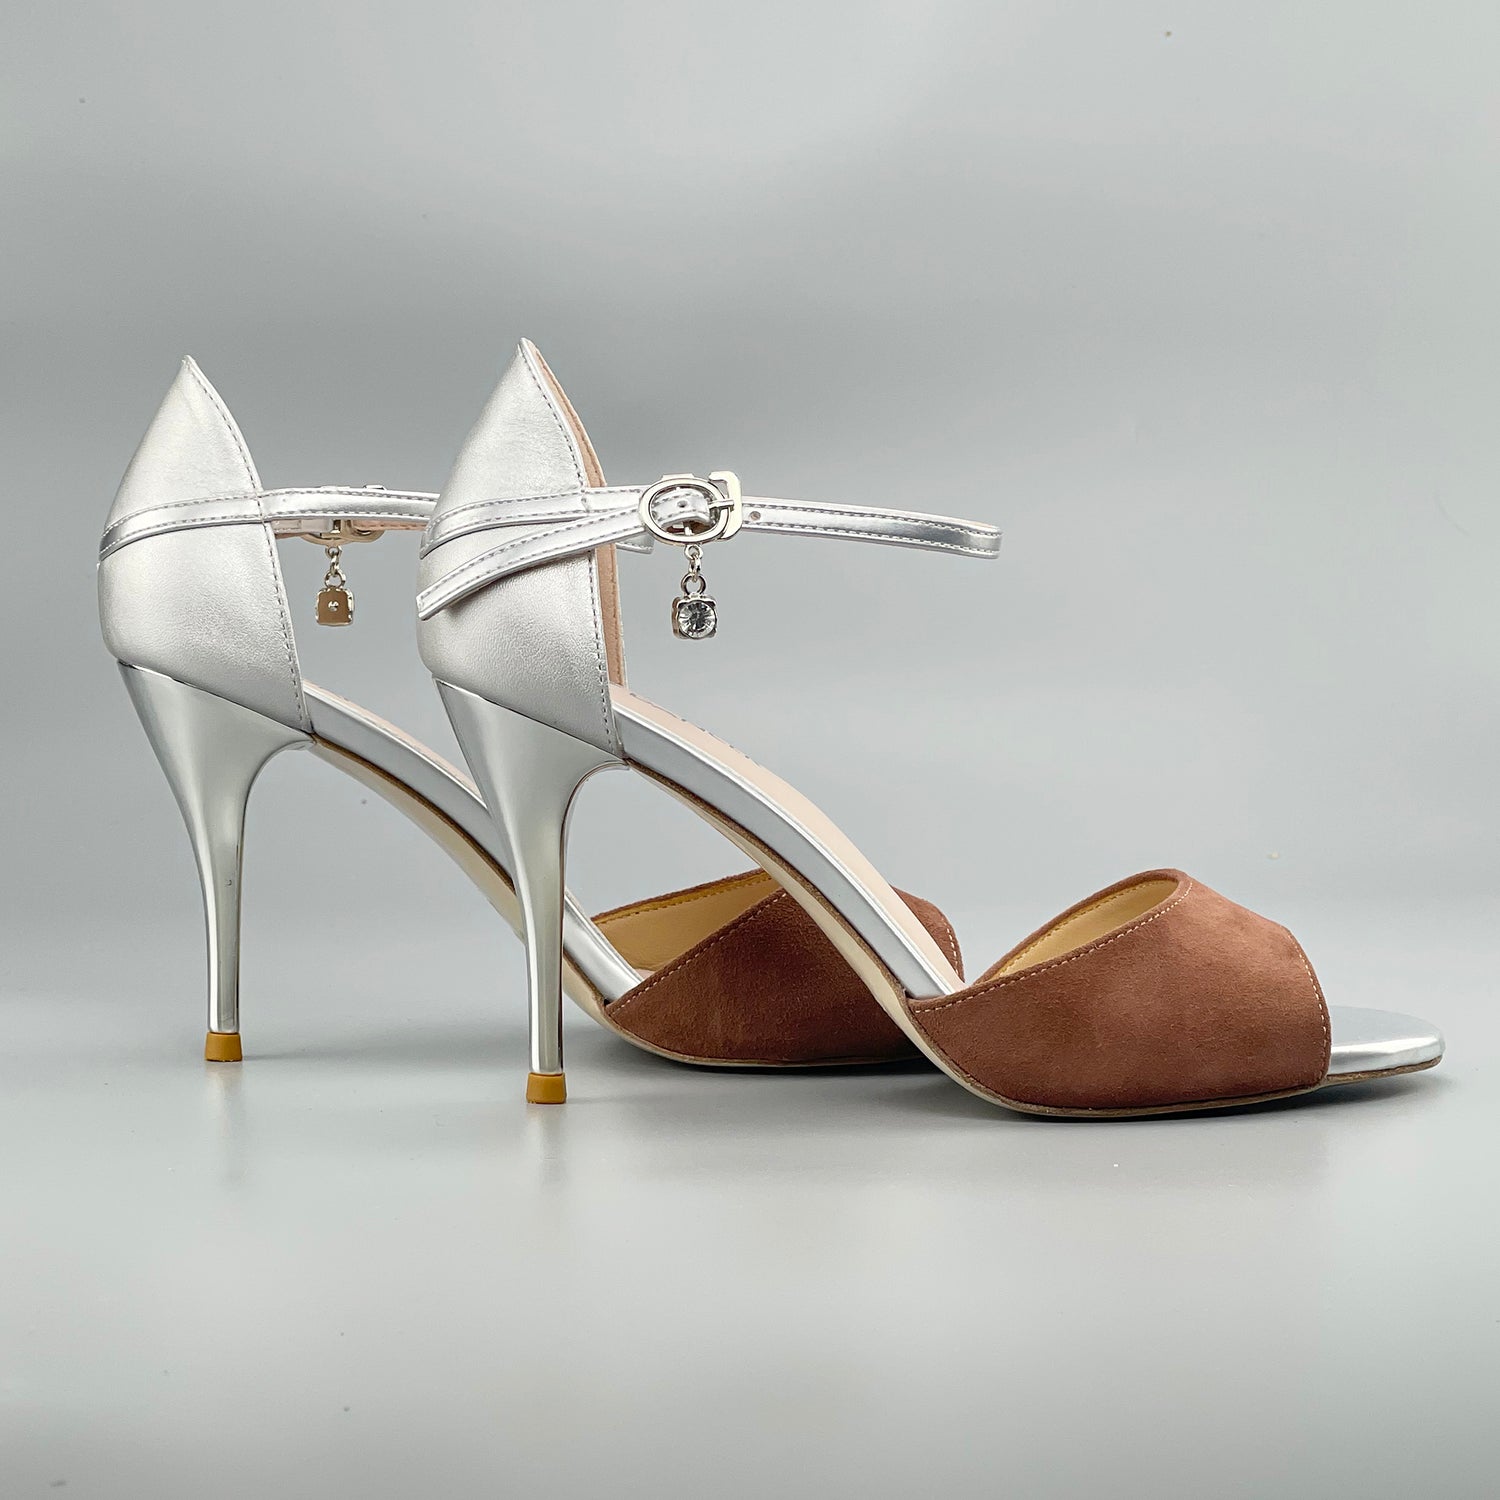 Pro Dancer open-toe Argentine Tango shoes with closed-back, high heels, hard leather sole in brown and silver (PD-9042E)10